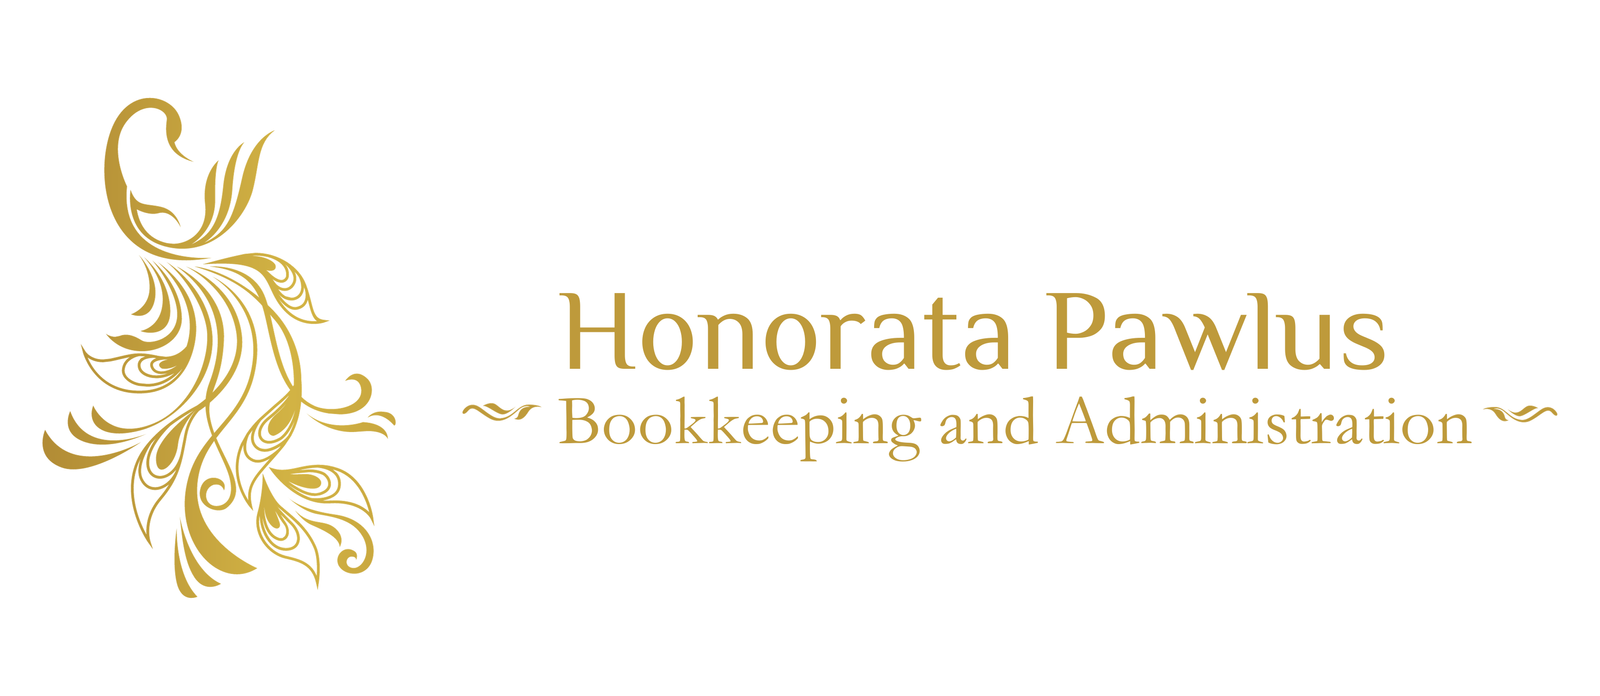 Honorata Pawlus Bookkeeping and Administration Services Ltd